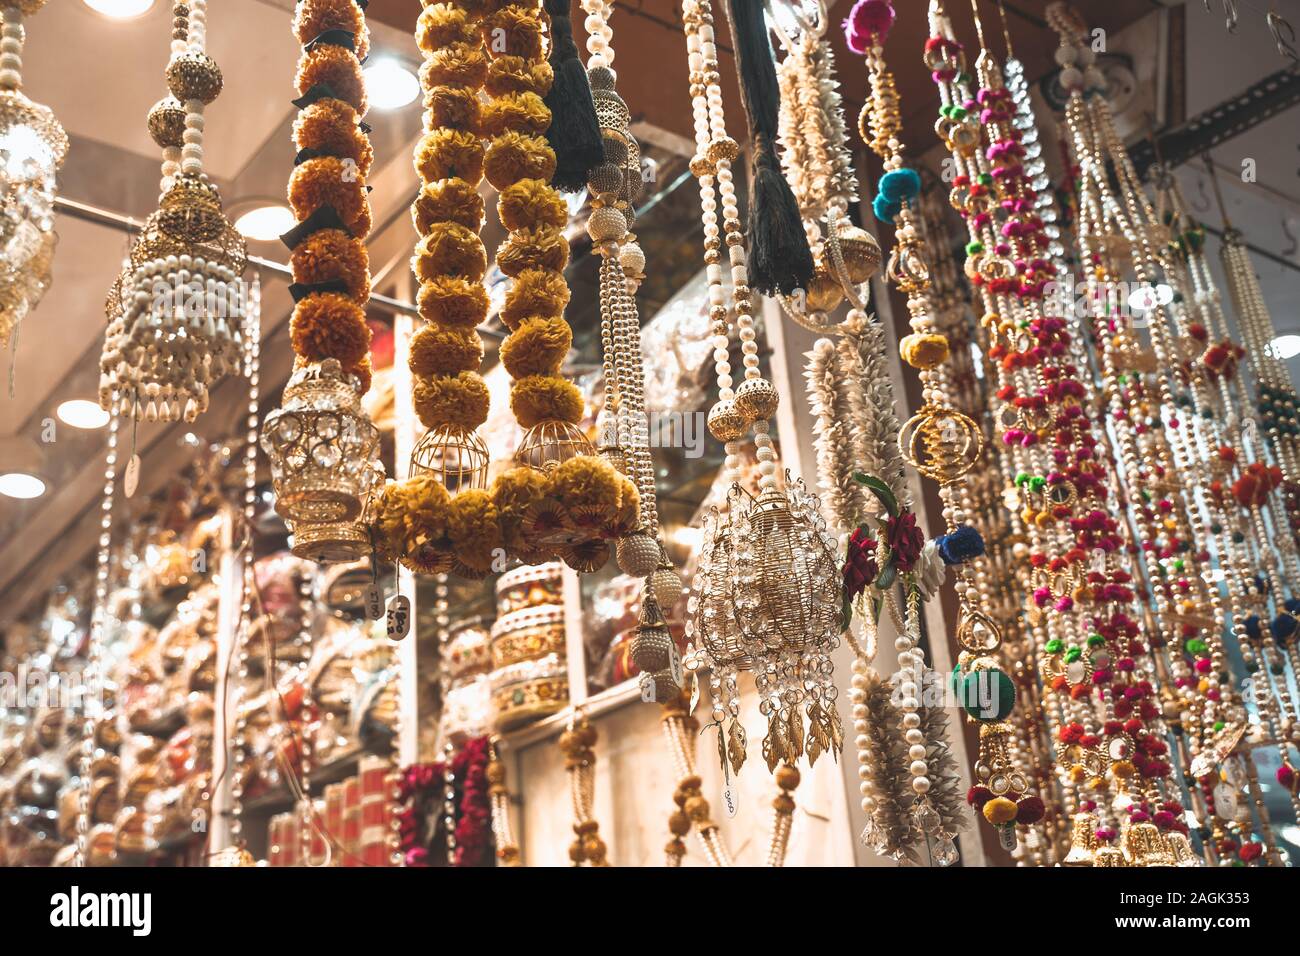 Colorful metallic decorations on display for sale in Chandi Chowk Old Delhi. These flowers, beads and bells designs are popular in weddings, festivals Stock Photo